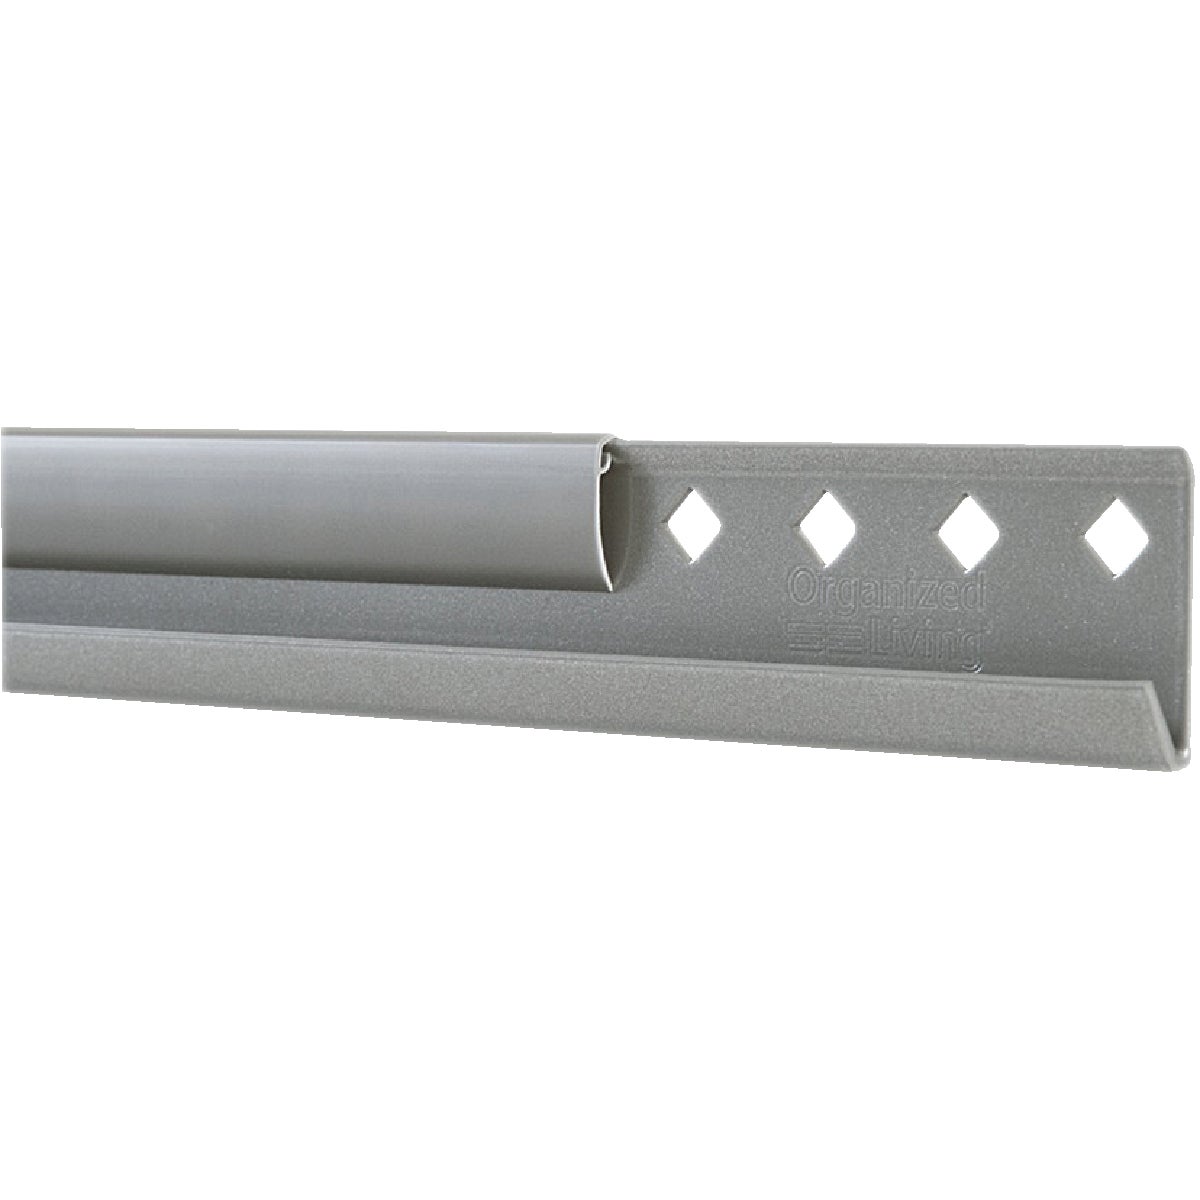 FreedomRail 78 In. Nickel Horizontal Hanging Rail with Cover